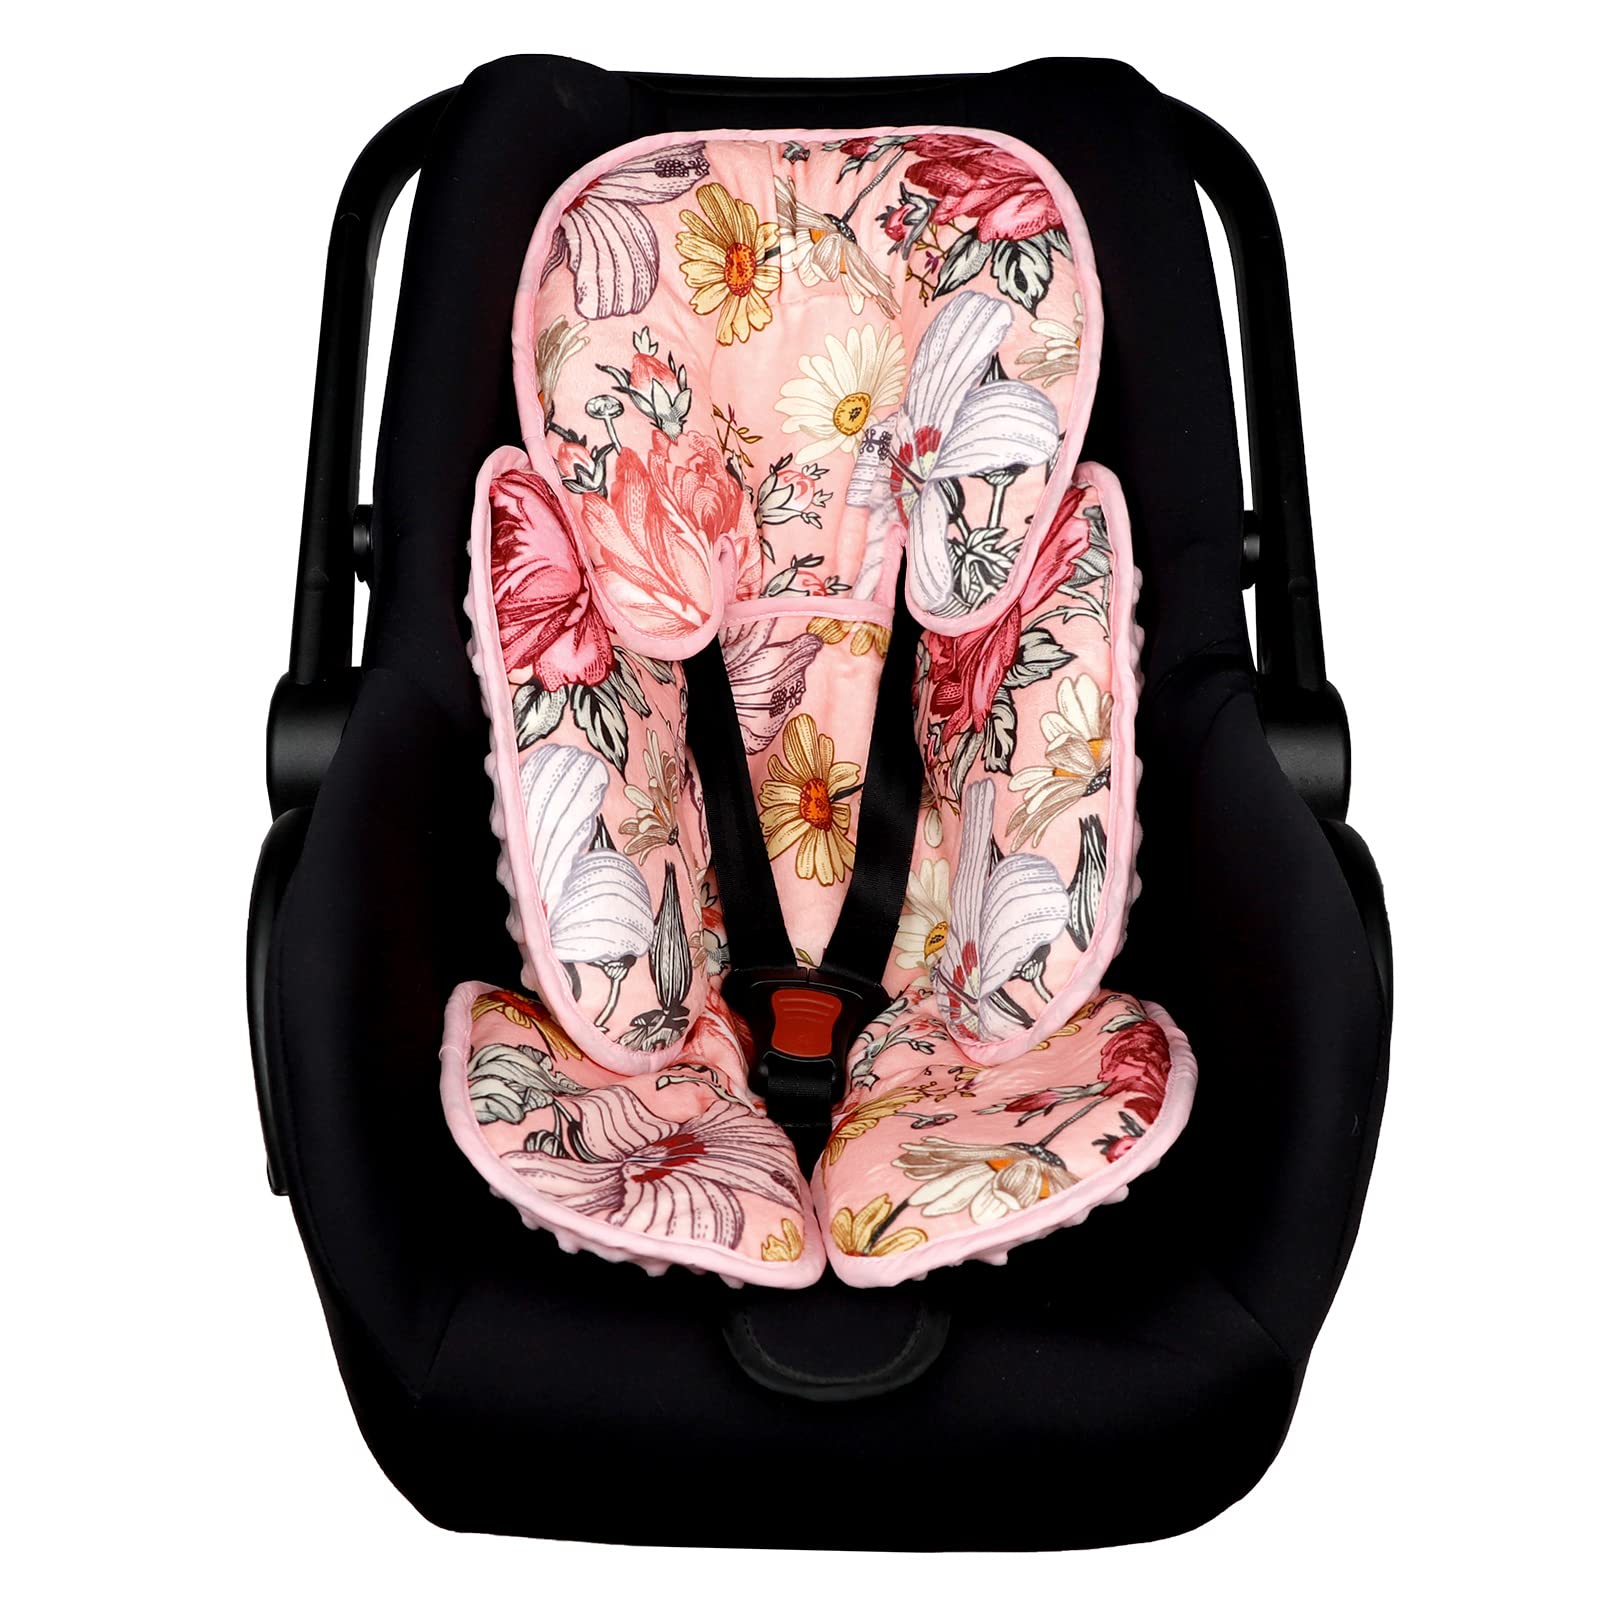 Pink Infant Car Seat Head Body Support Pillow,Baby Car Seat Strap Covers Shoulder Pads for Baby Kid, Super Soft Infant Carseat Belt Covers for All Car Seat Stroller